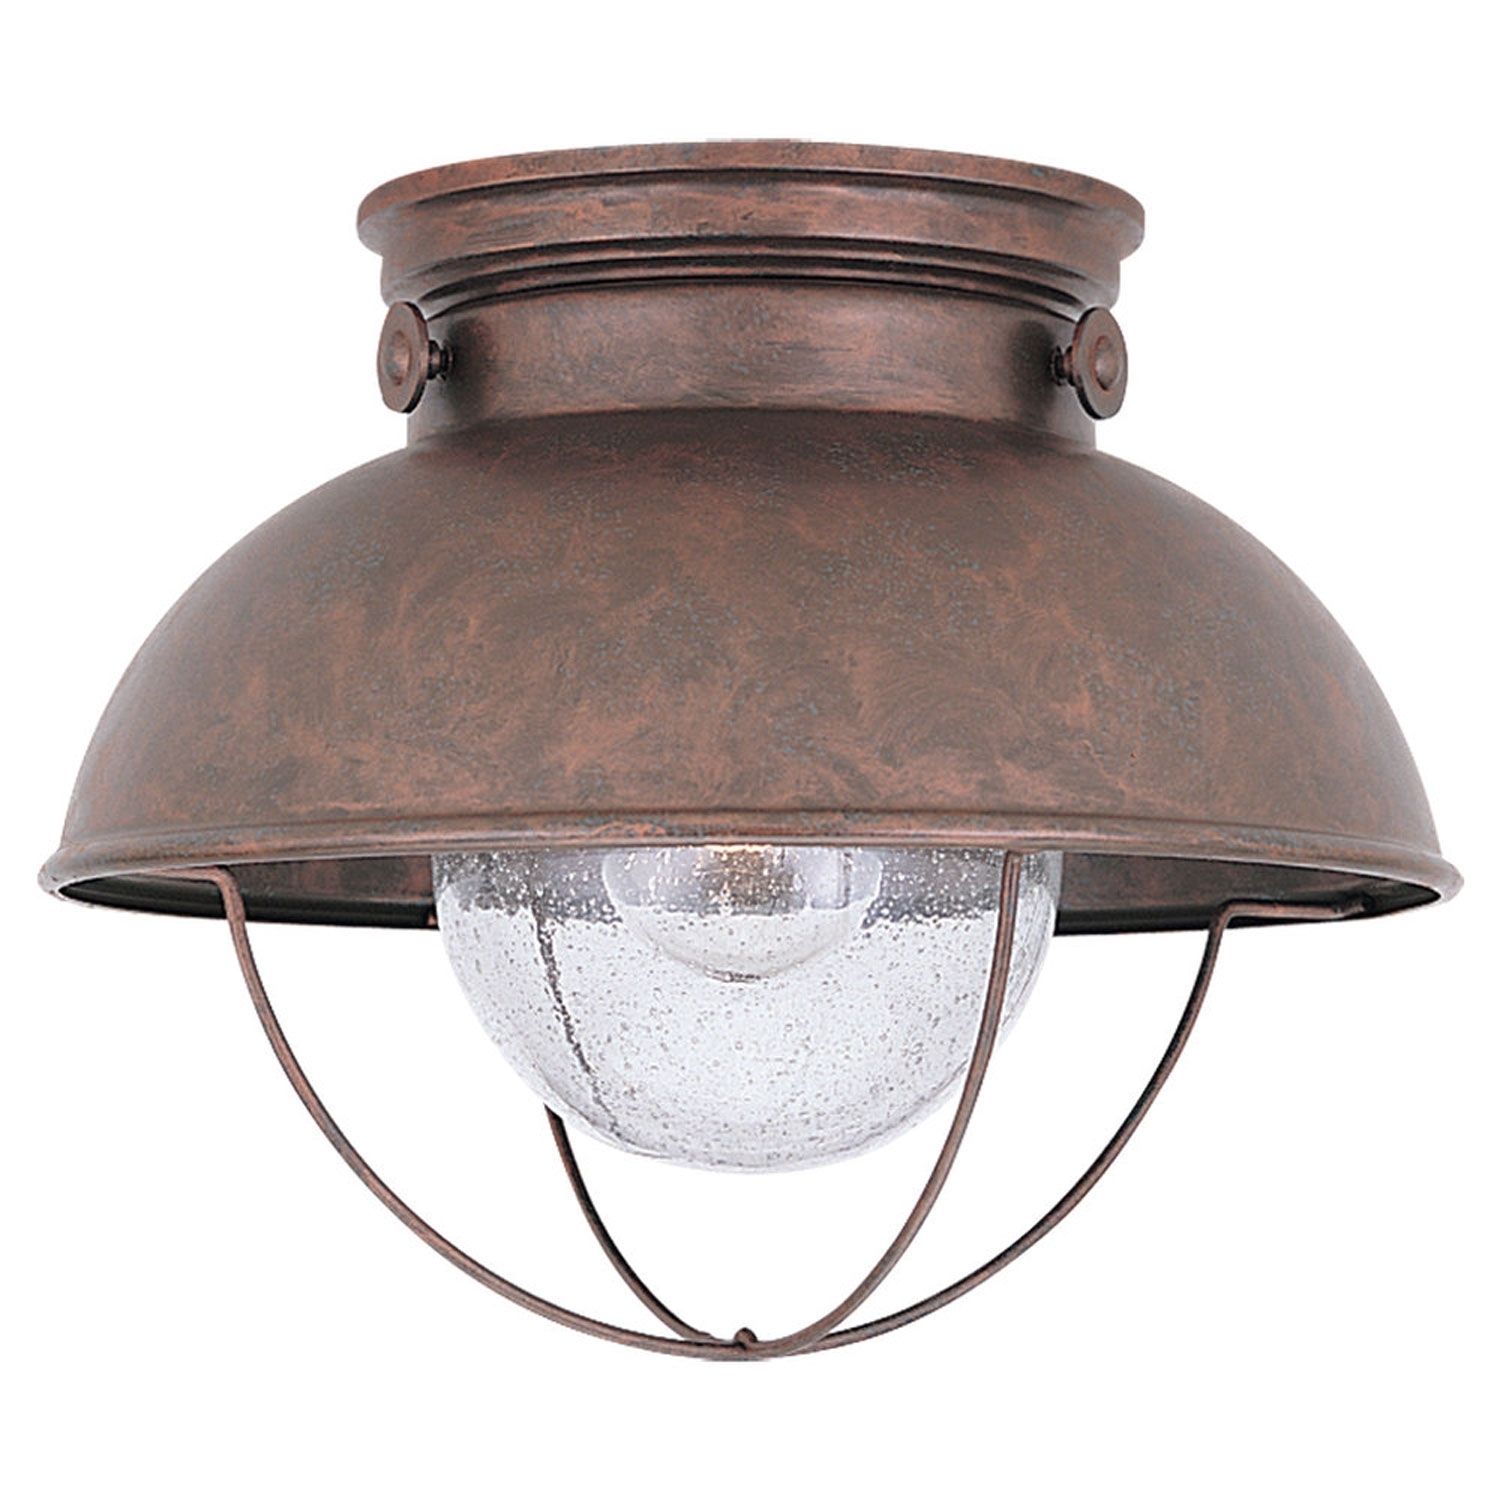 15 Best Collection of Outdoor Ceiling Lights With Motion ...